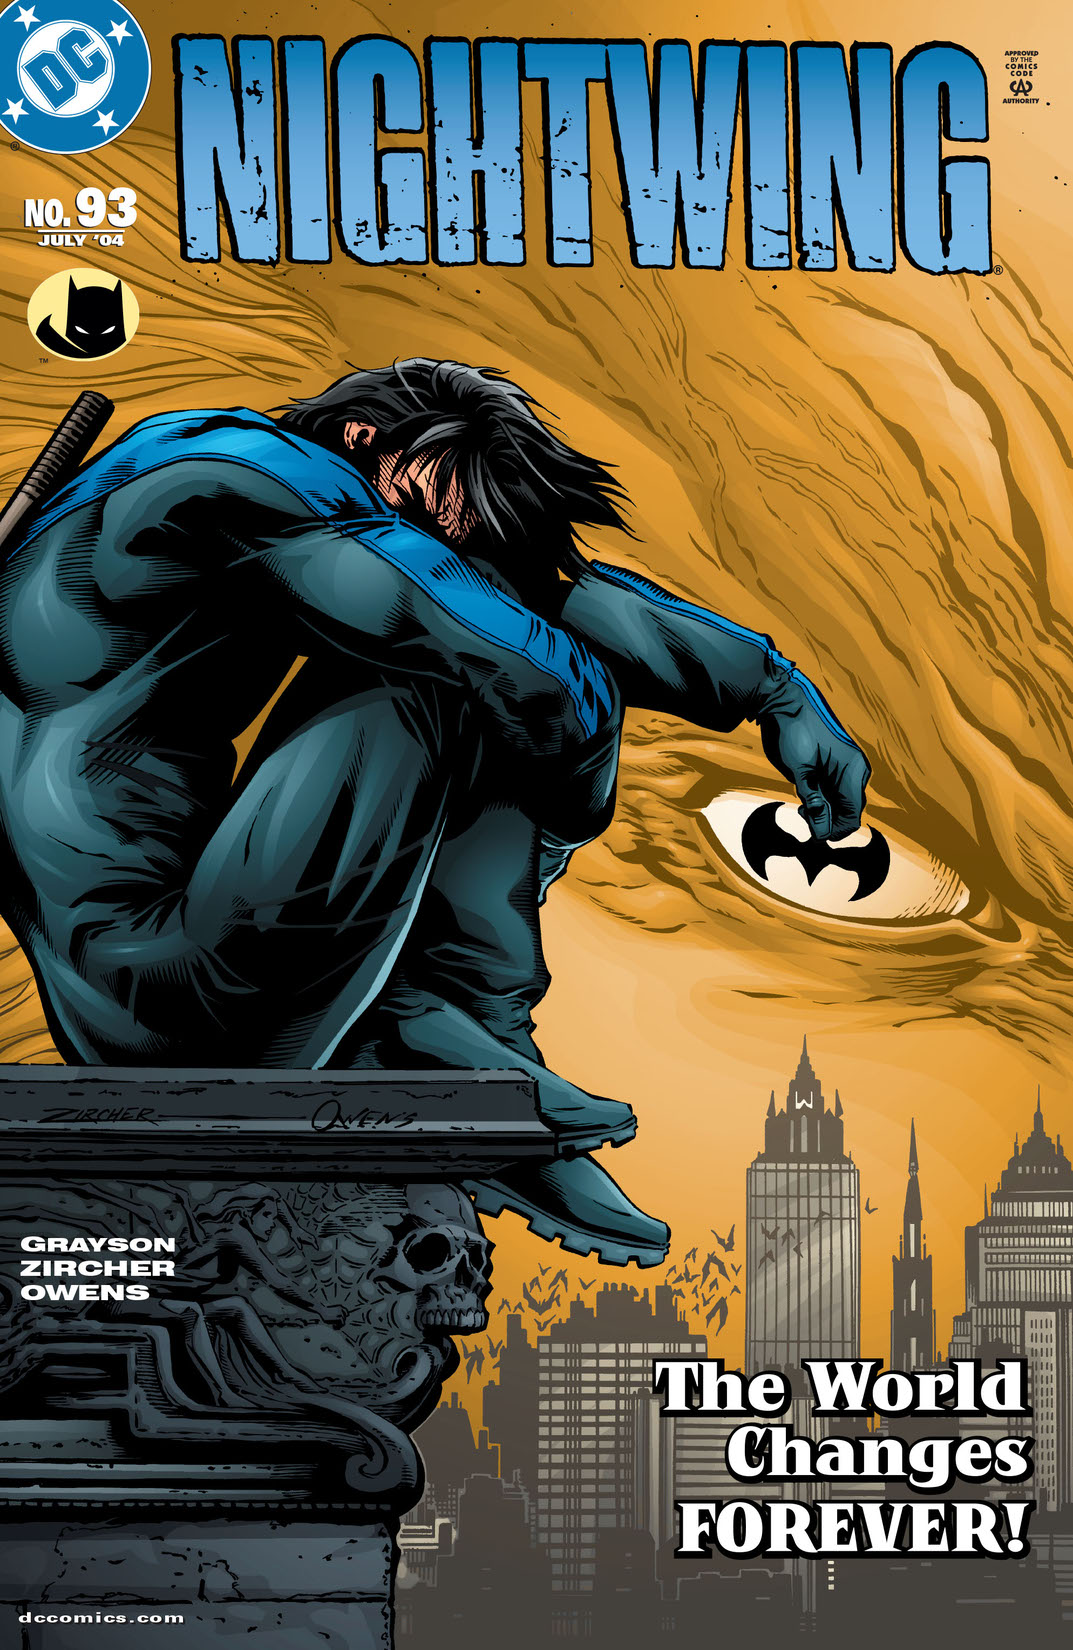 Nightwing (1996-) #93 preview images